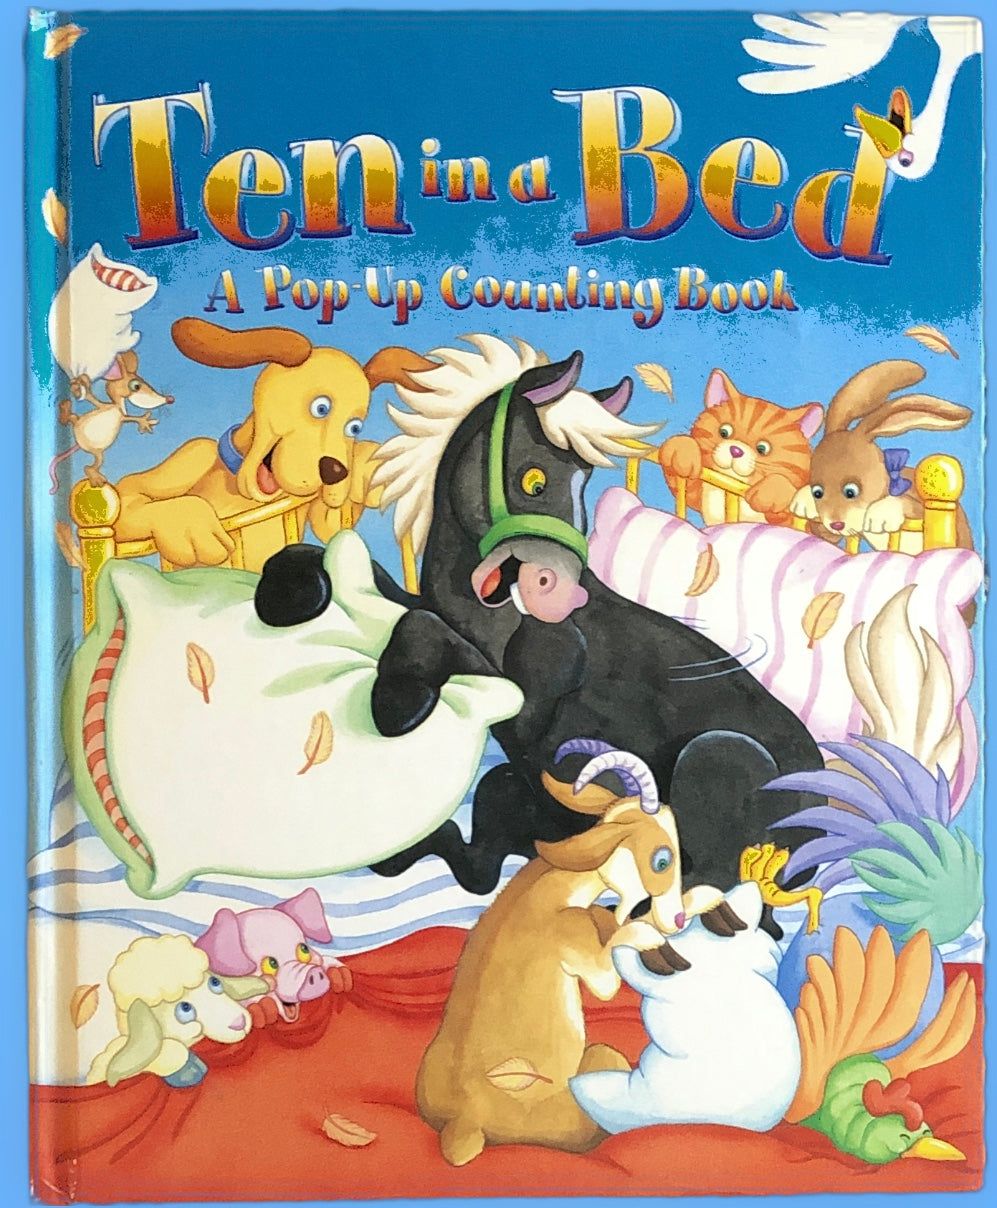 Ten in a Bed: A Pop-Up Counting Book by Gill Davies